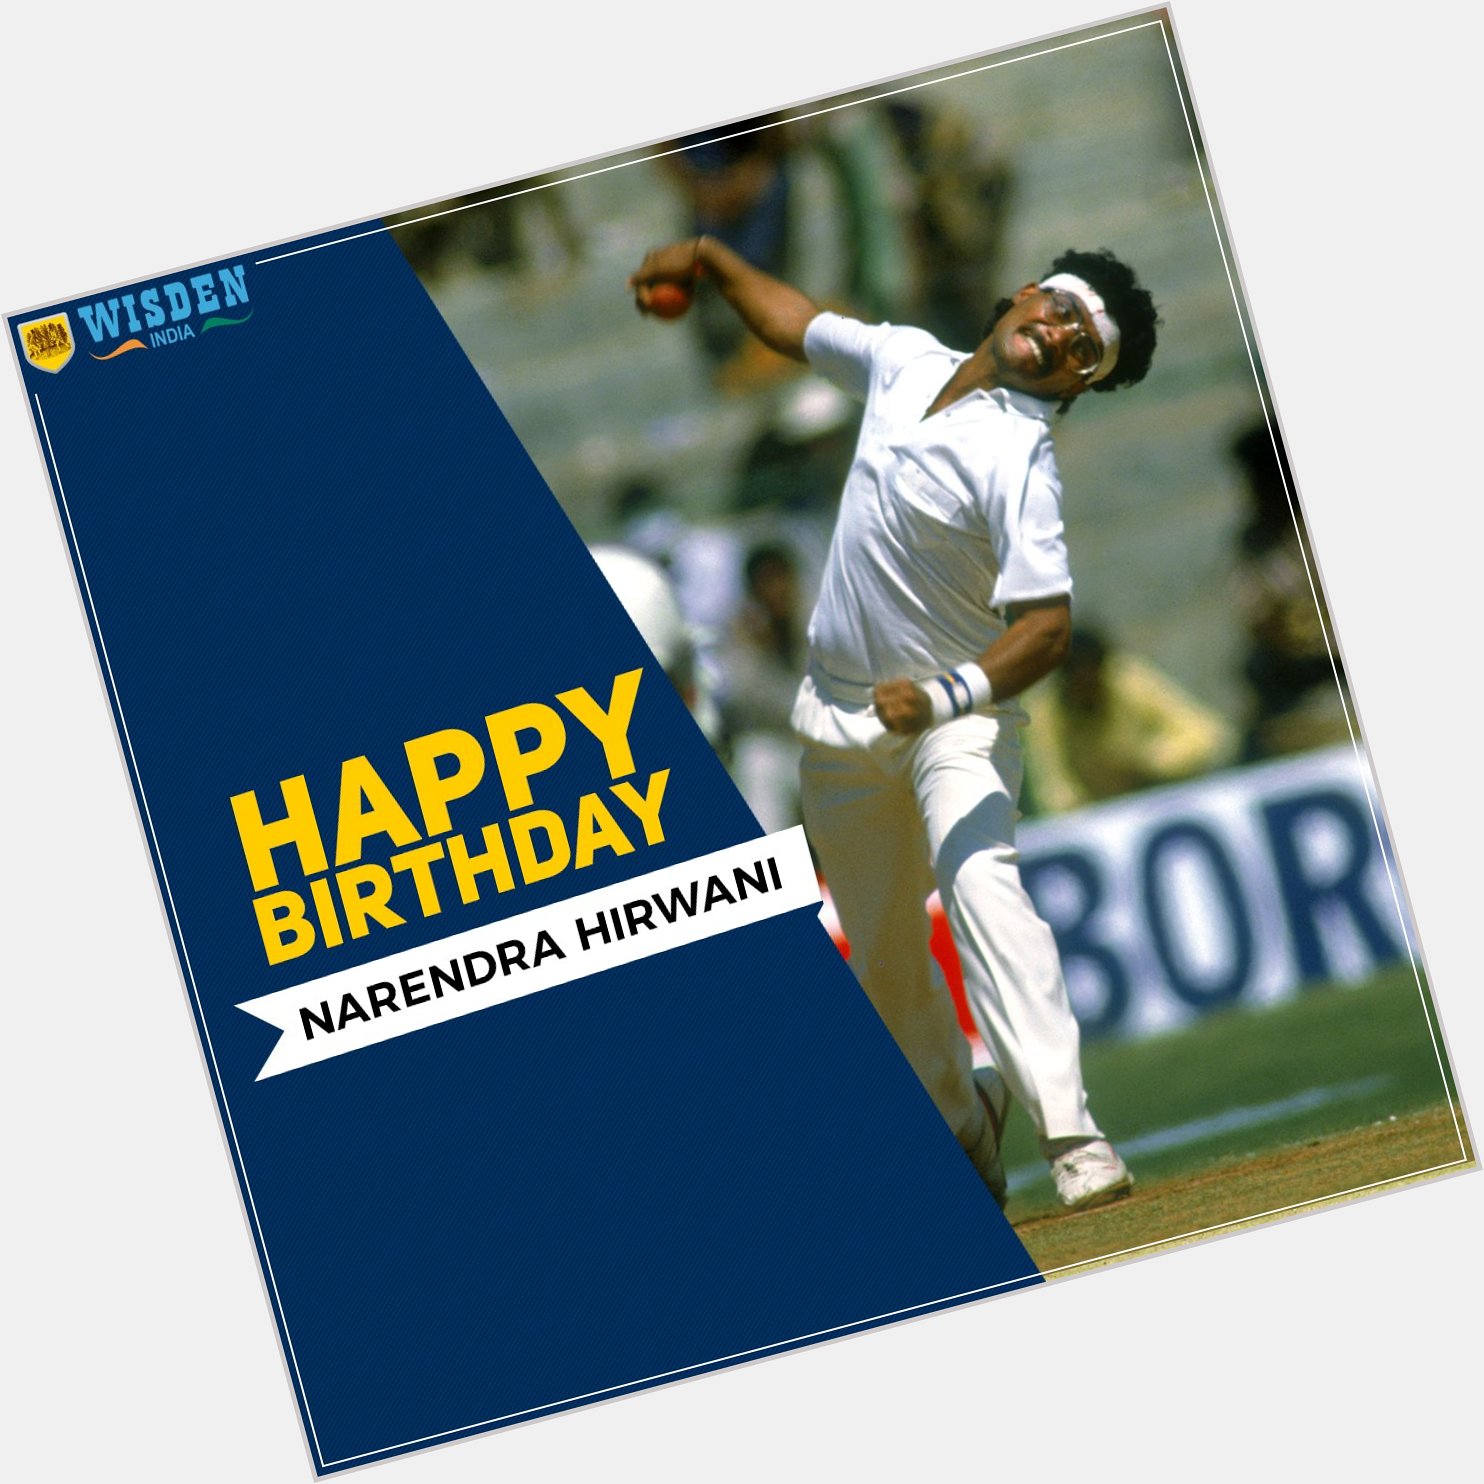 His 16/136 are the best figures for a debutant in tests, Happy Birthday Narendra Hirwani! 